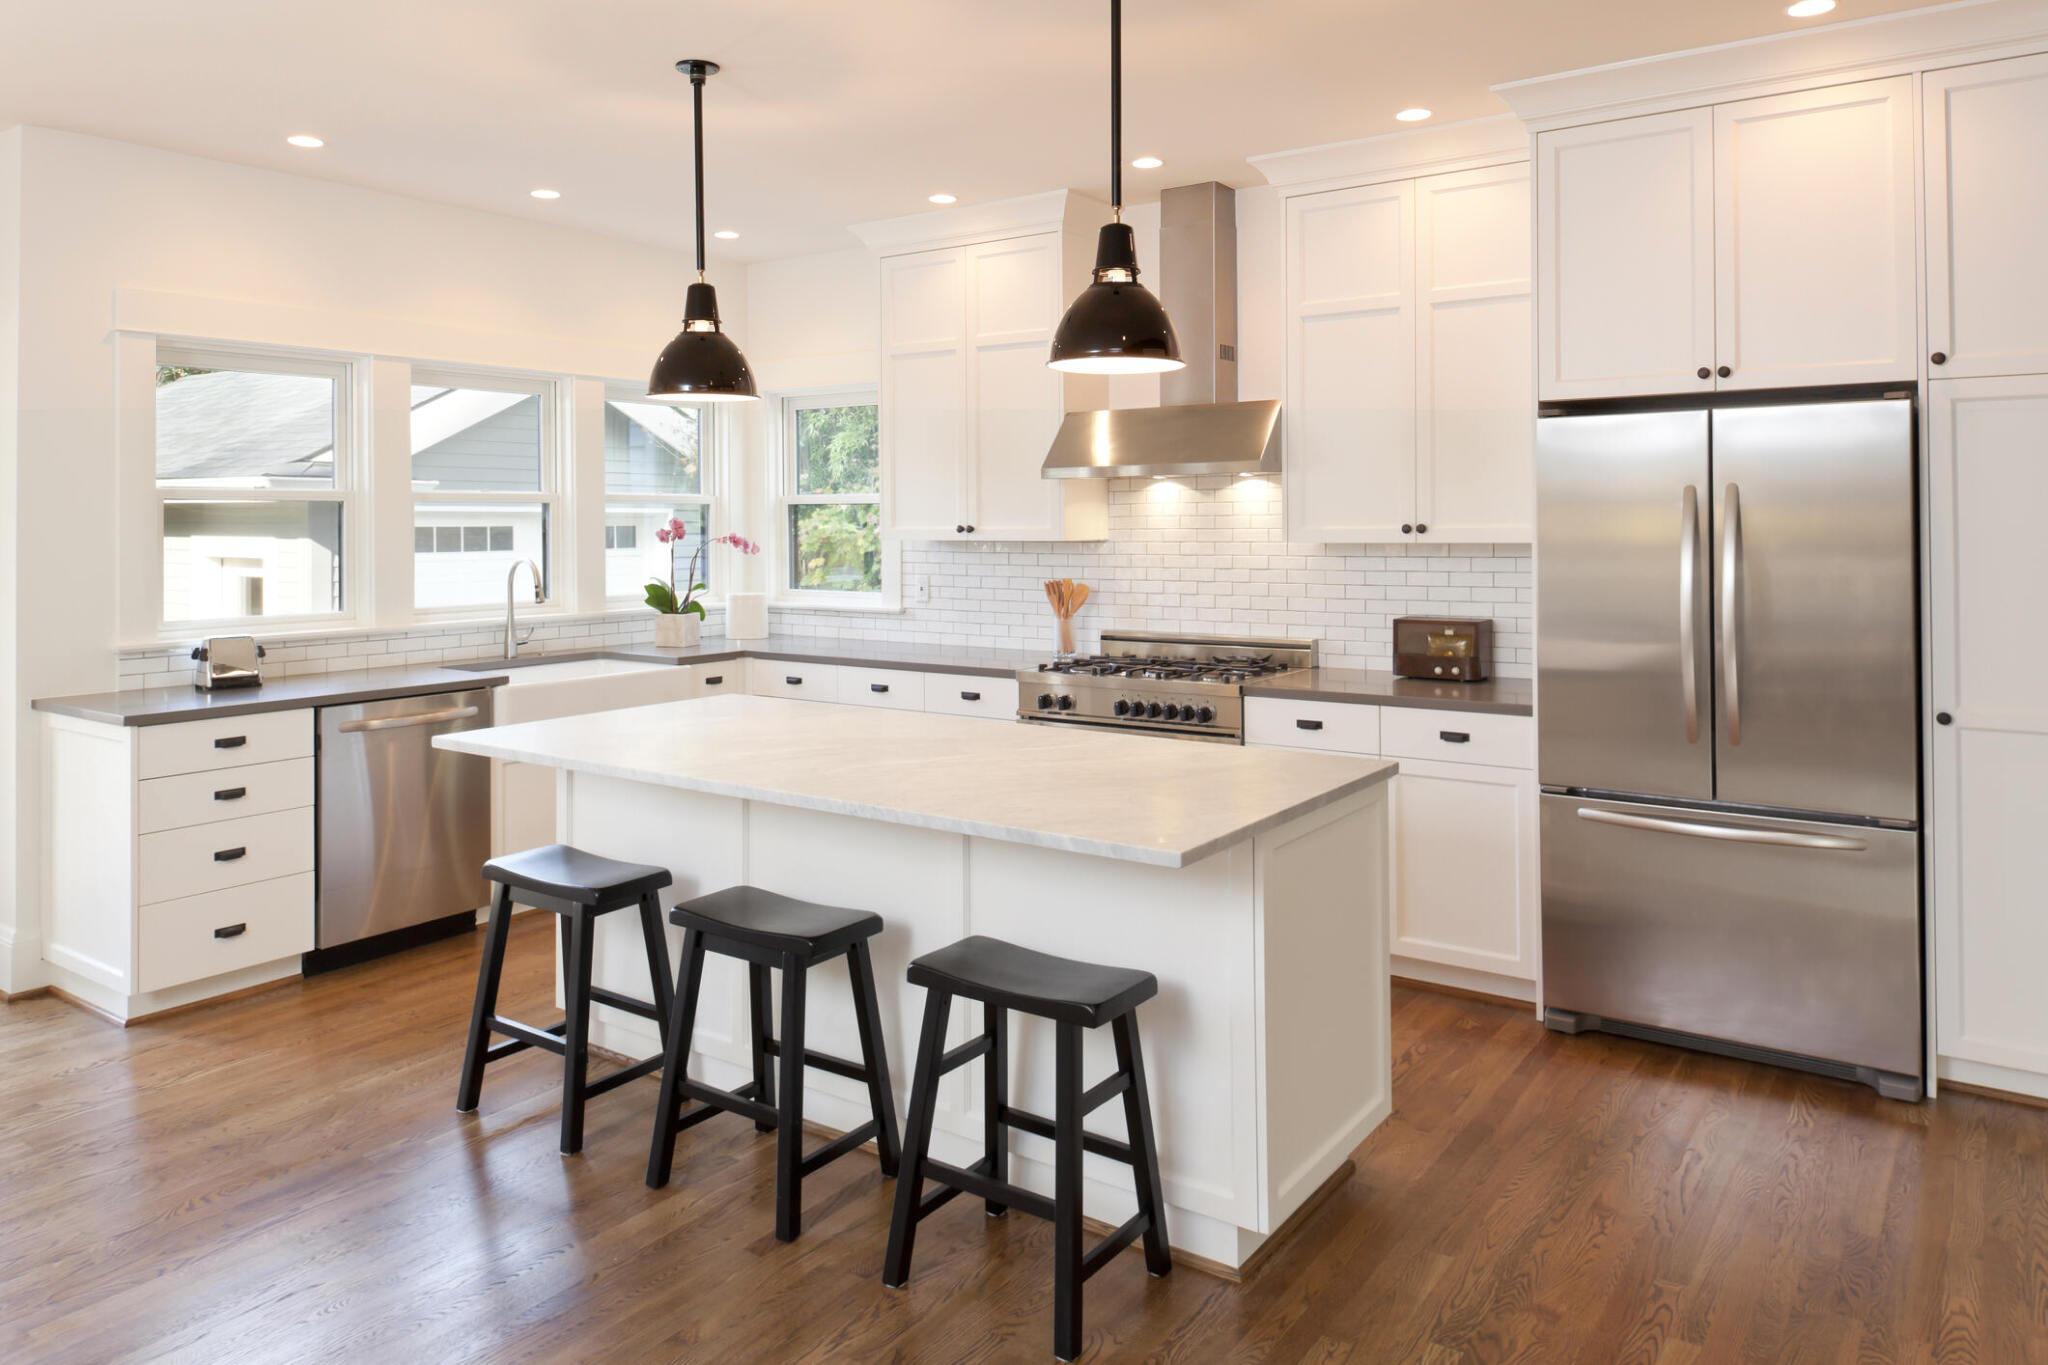 Introducing Exceptional Kitchen Renovation Services by Persistent Renovations